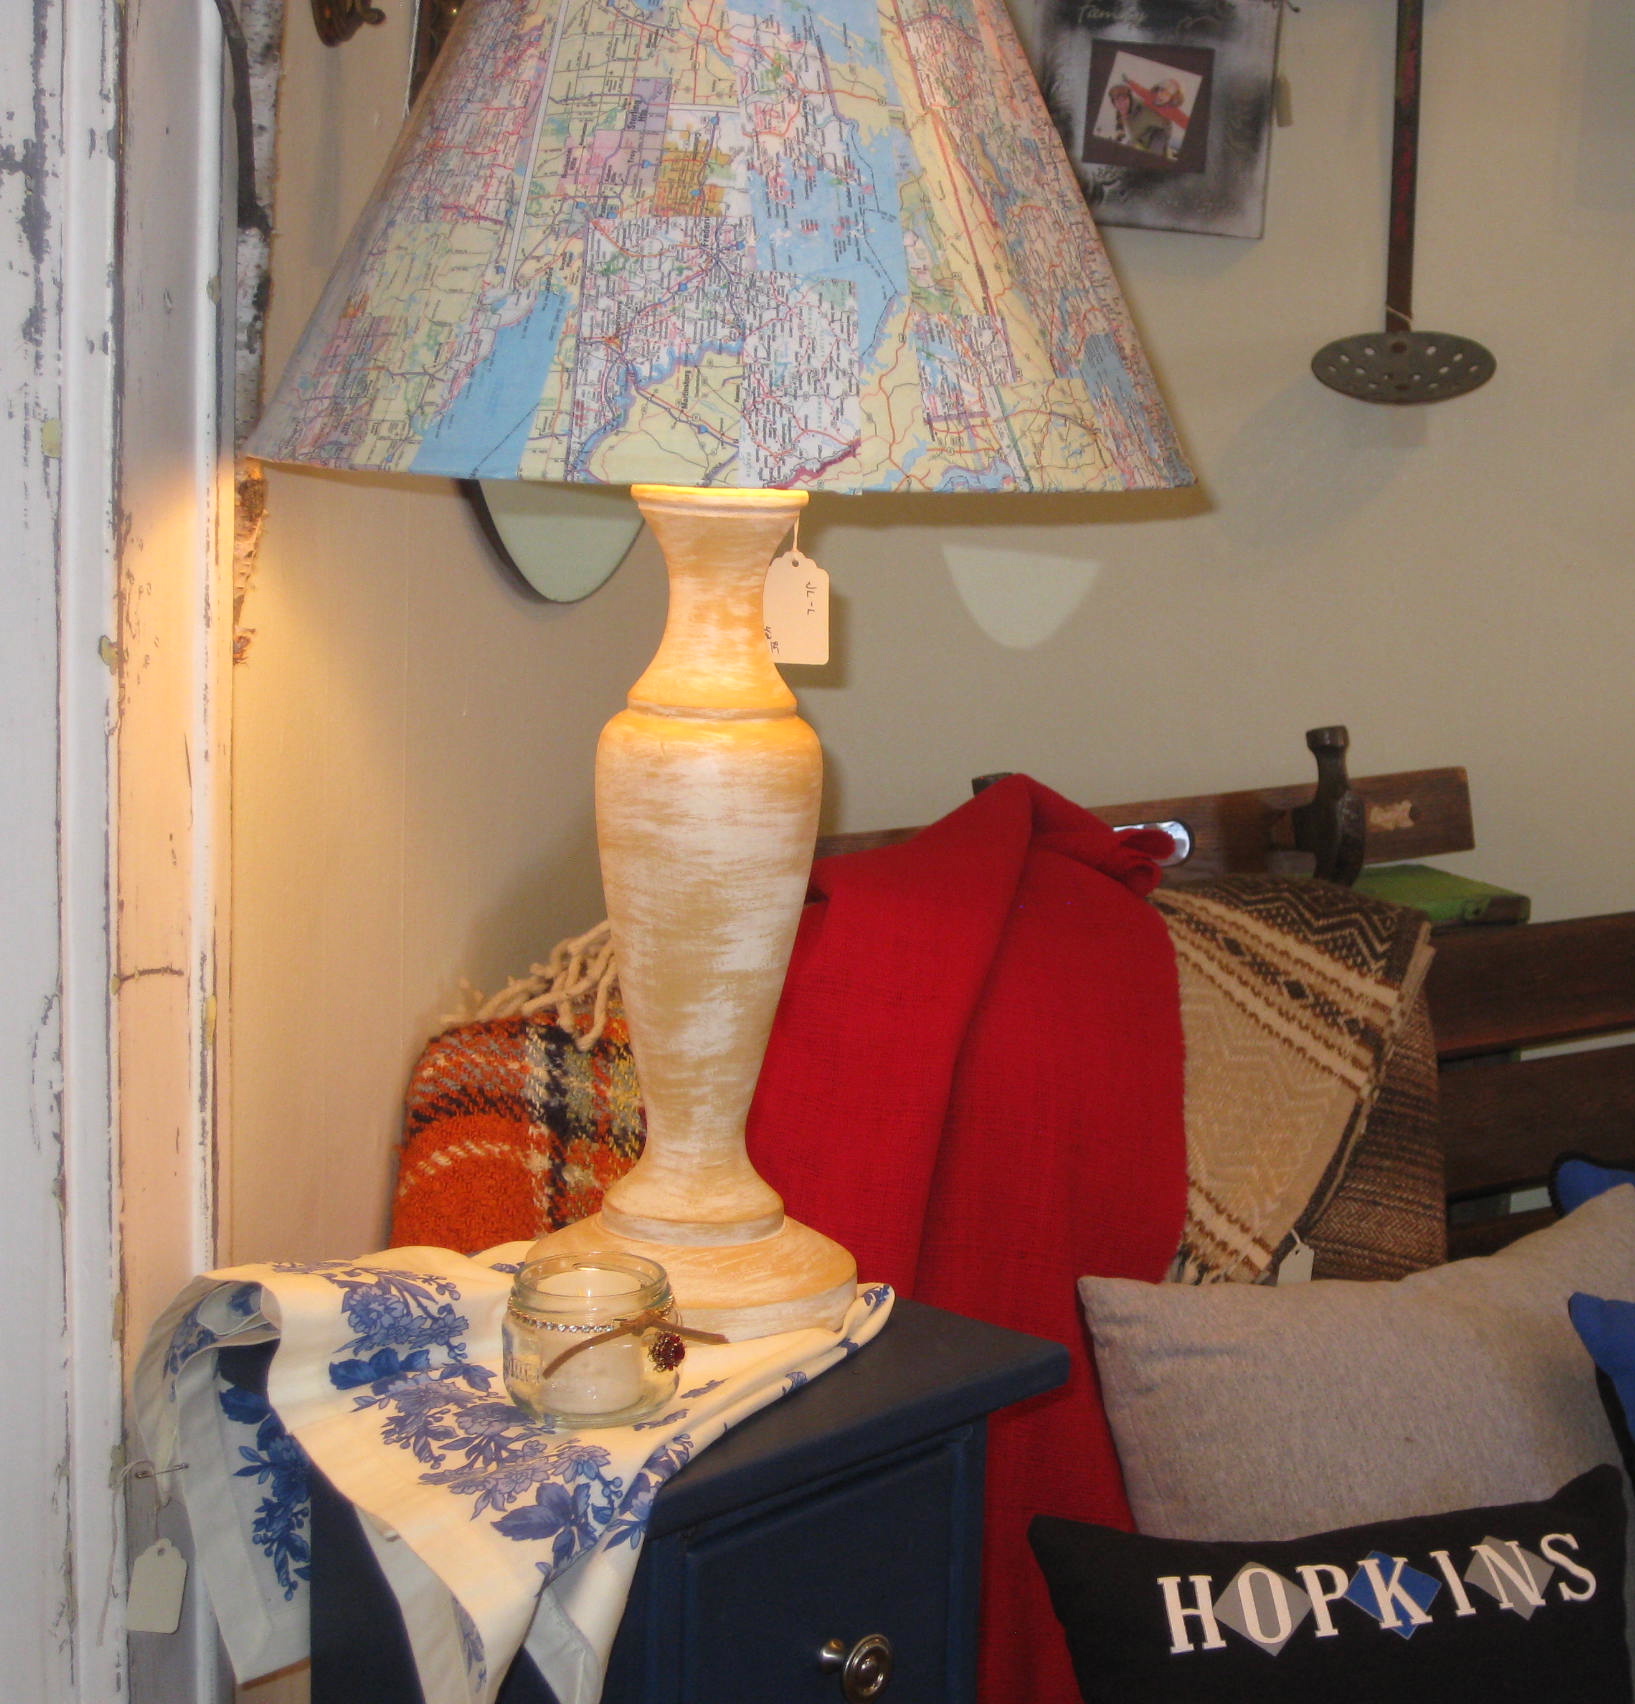 Map Lampshade at Garden Party Gallery